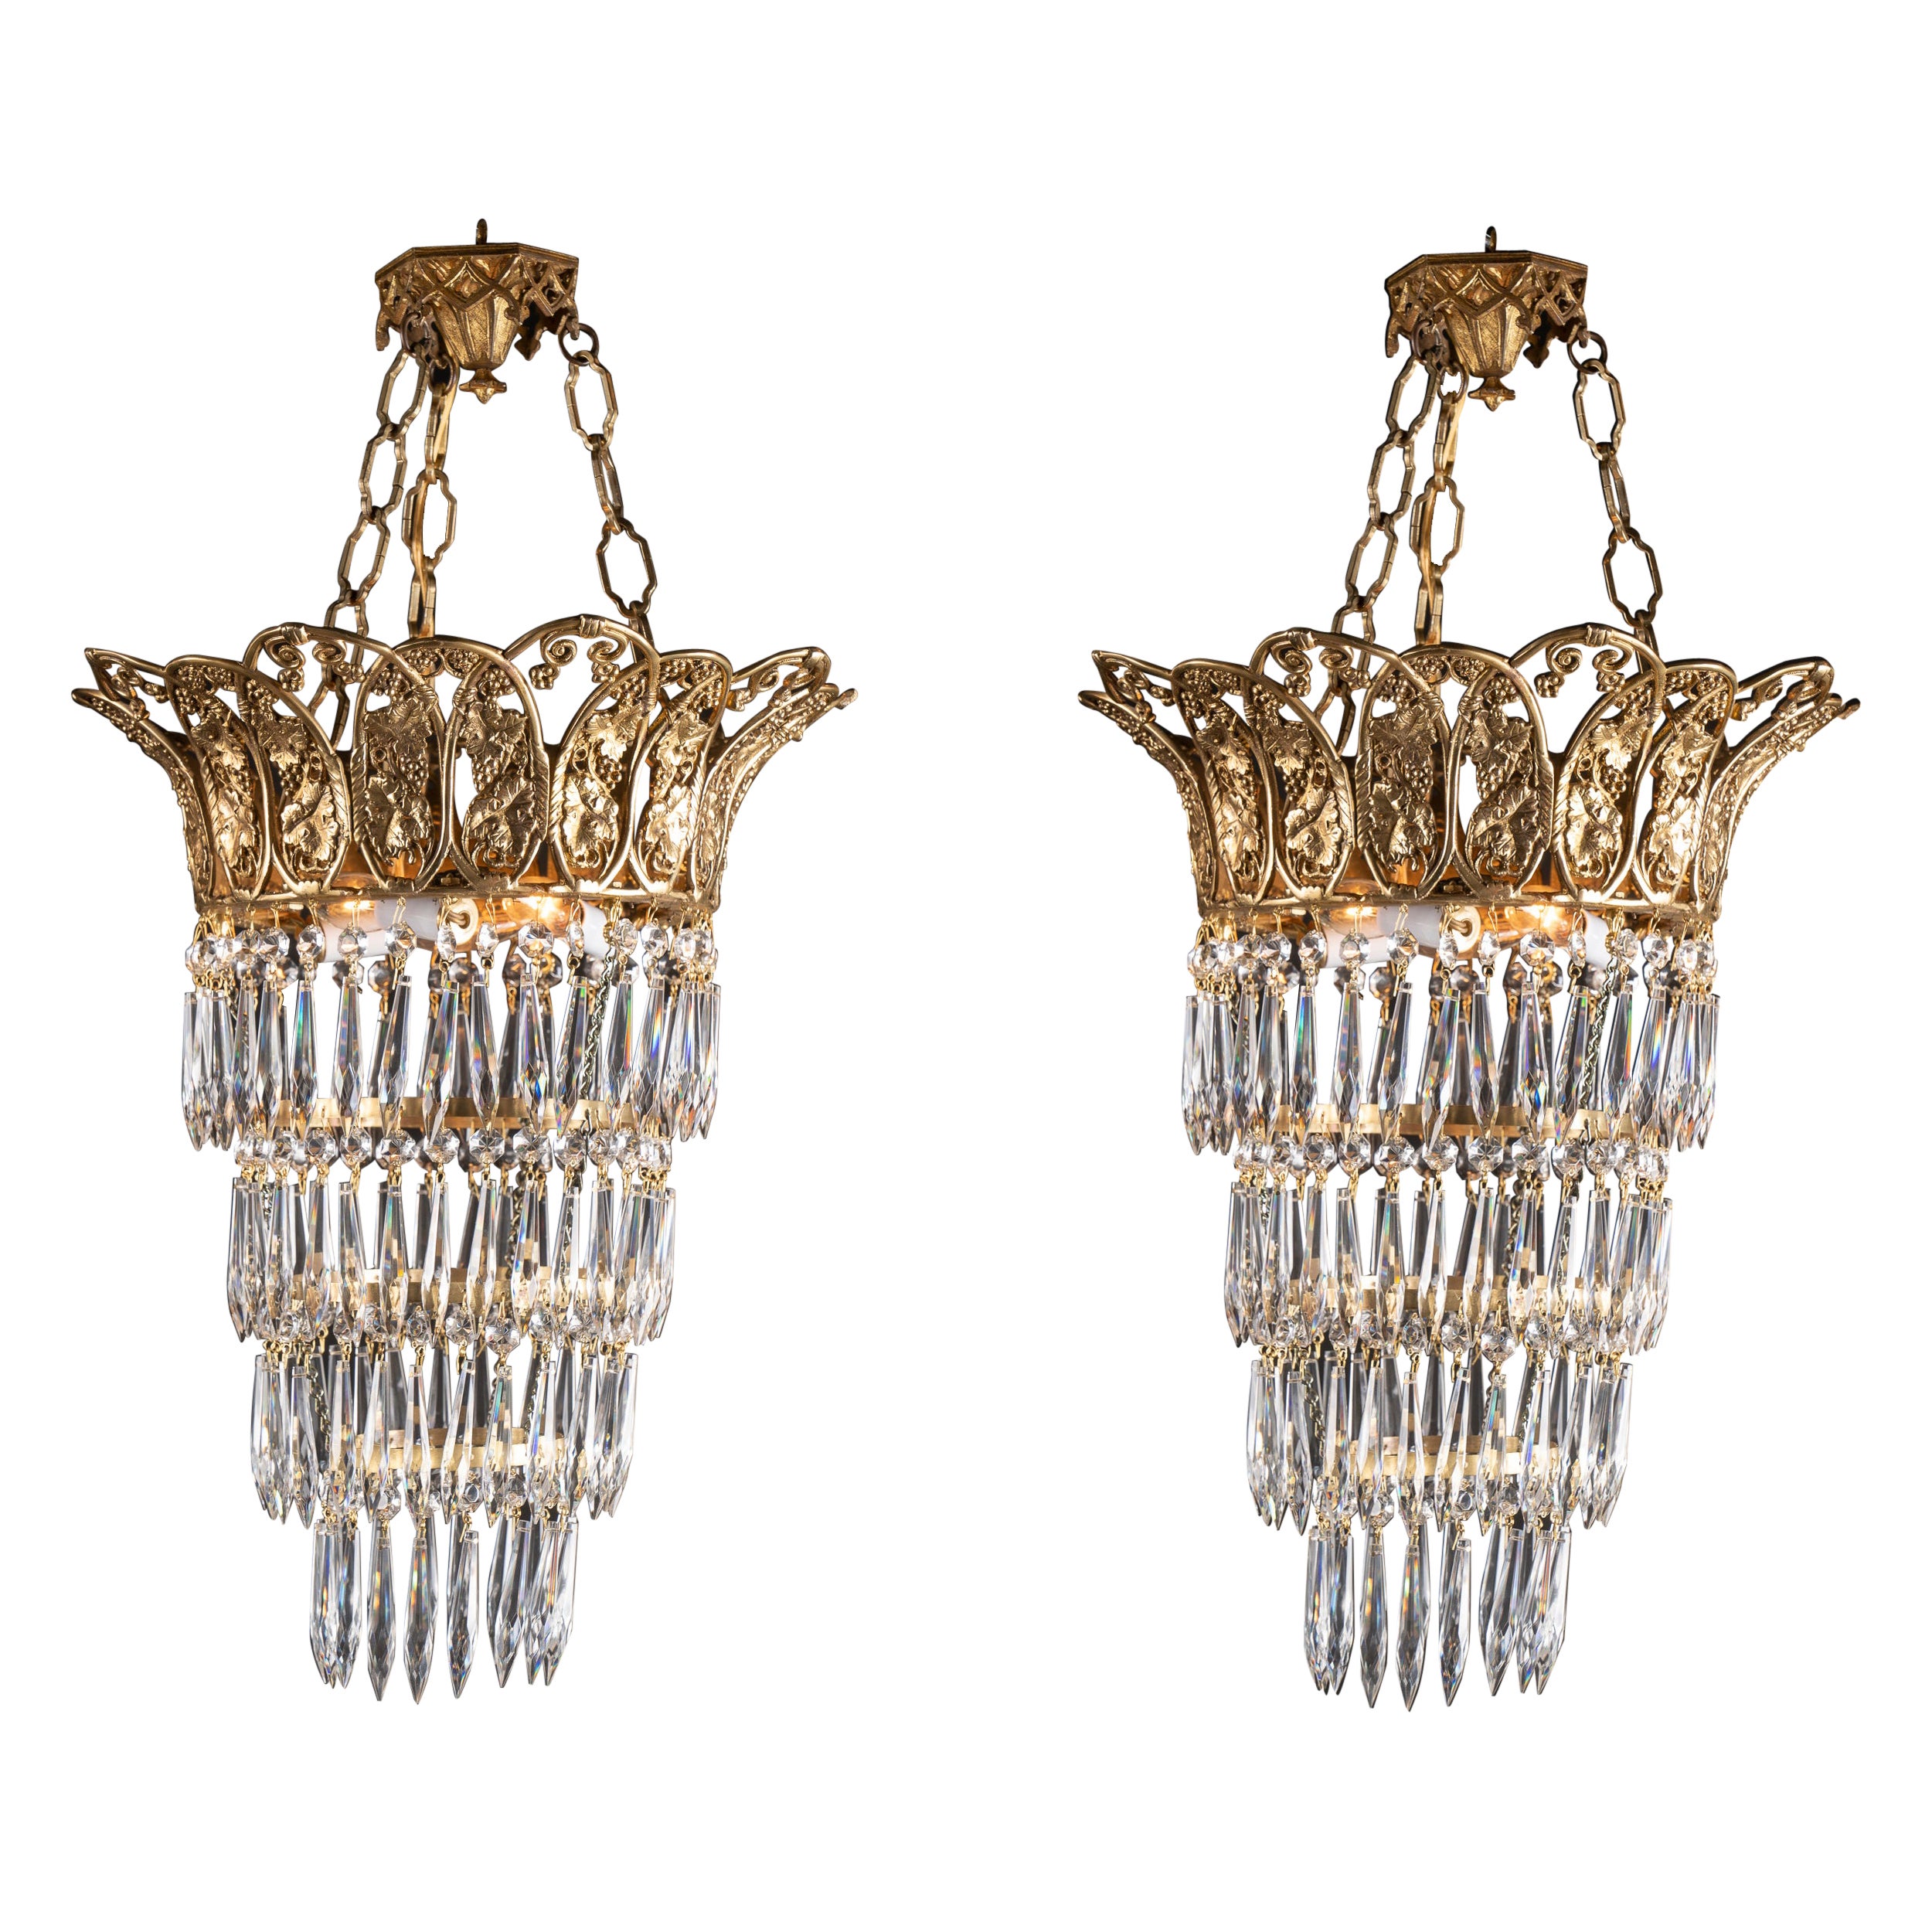 Pair of Louis XVI Bronze Chandeliers with Crystals, French 19th Century